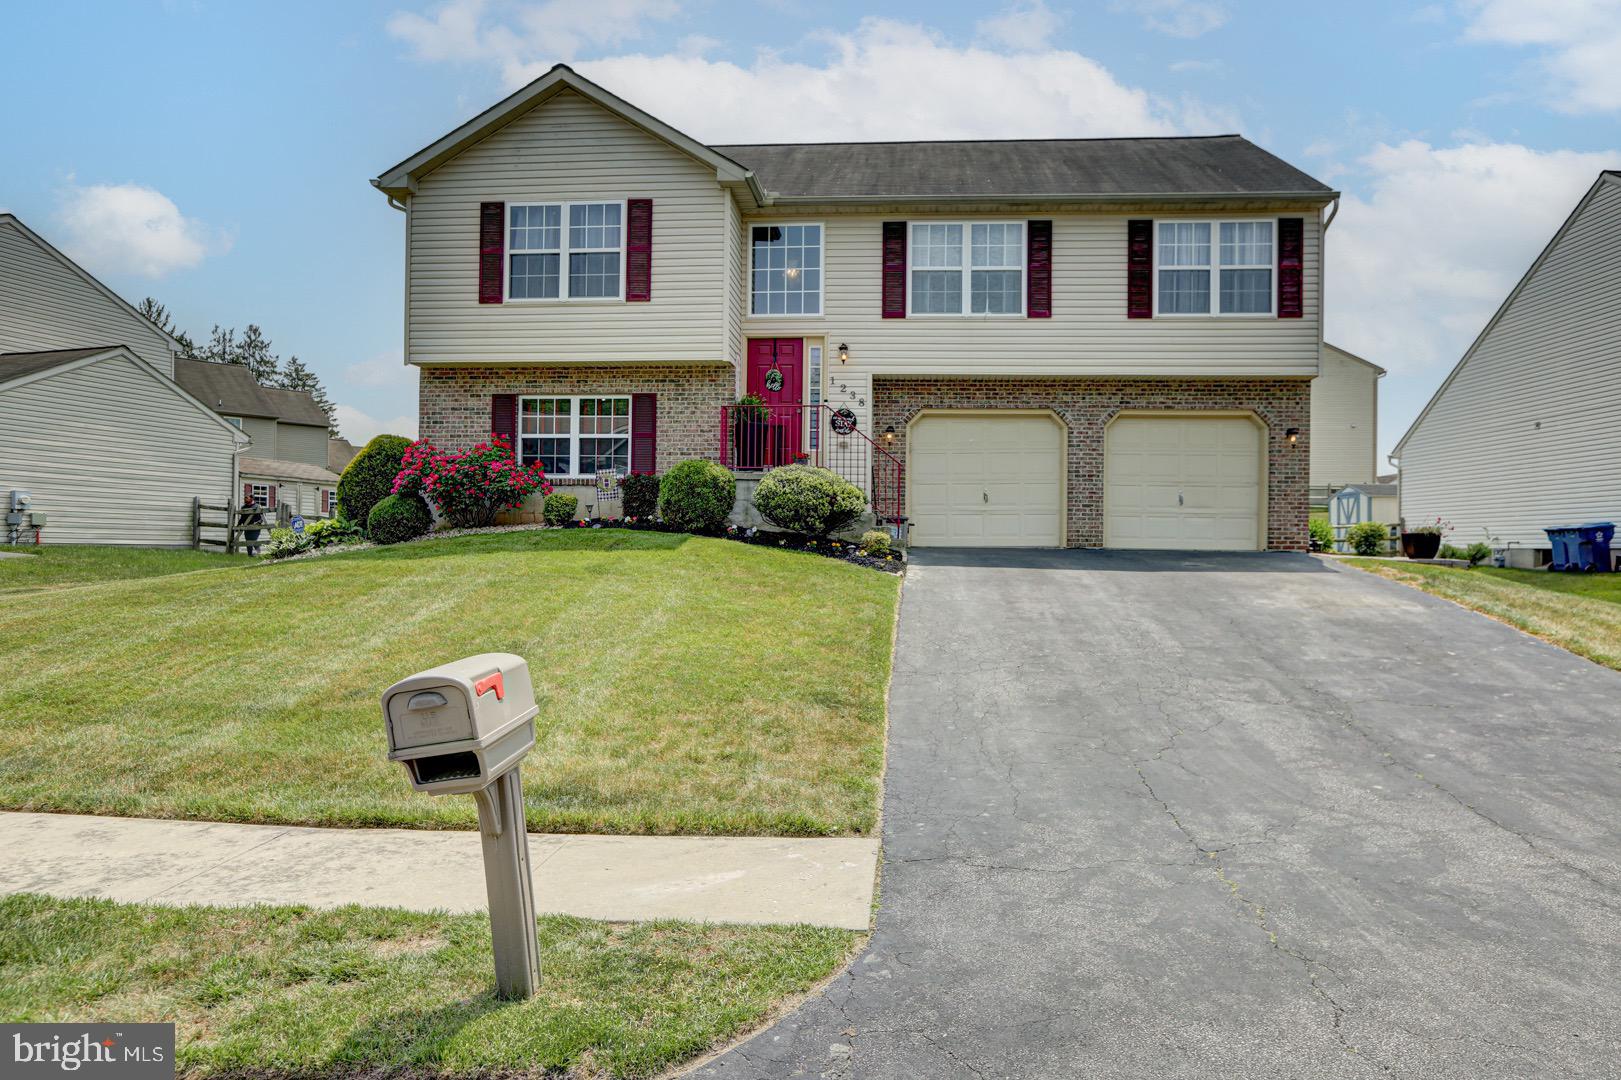 Welcome to 1238 Canvasback Drive in the community of Mallard Pointe, New Castle. This lovely split-l